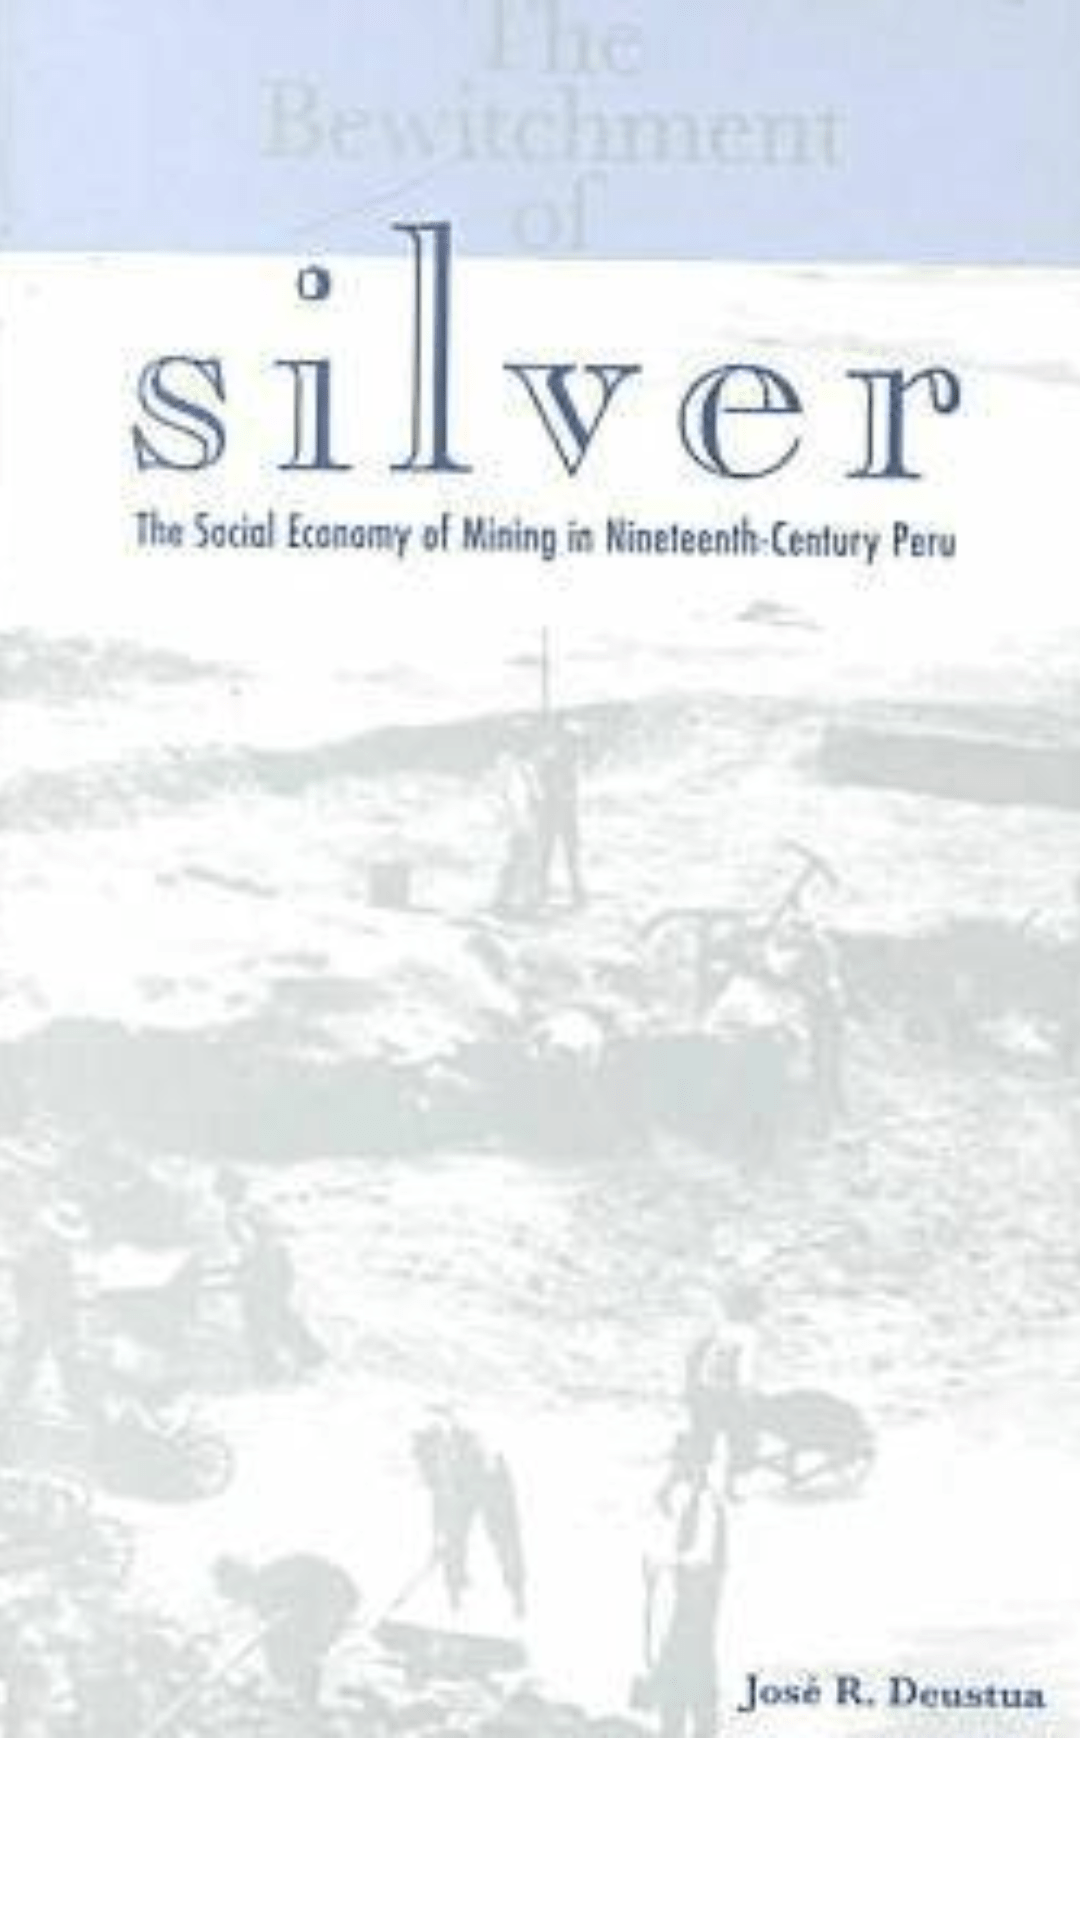 The Bewitchment of Silver: The Social Economy of Mining in Nineteenth-century Peru